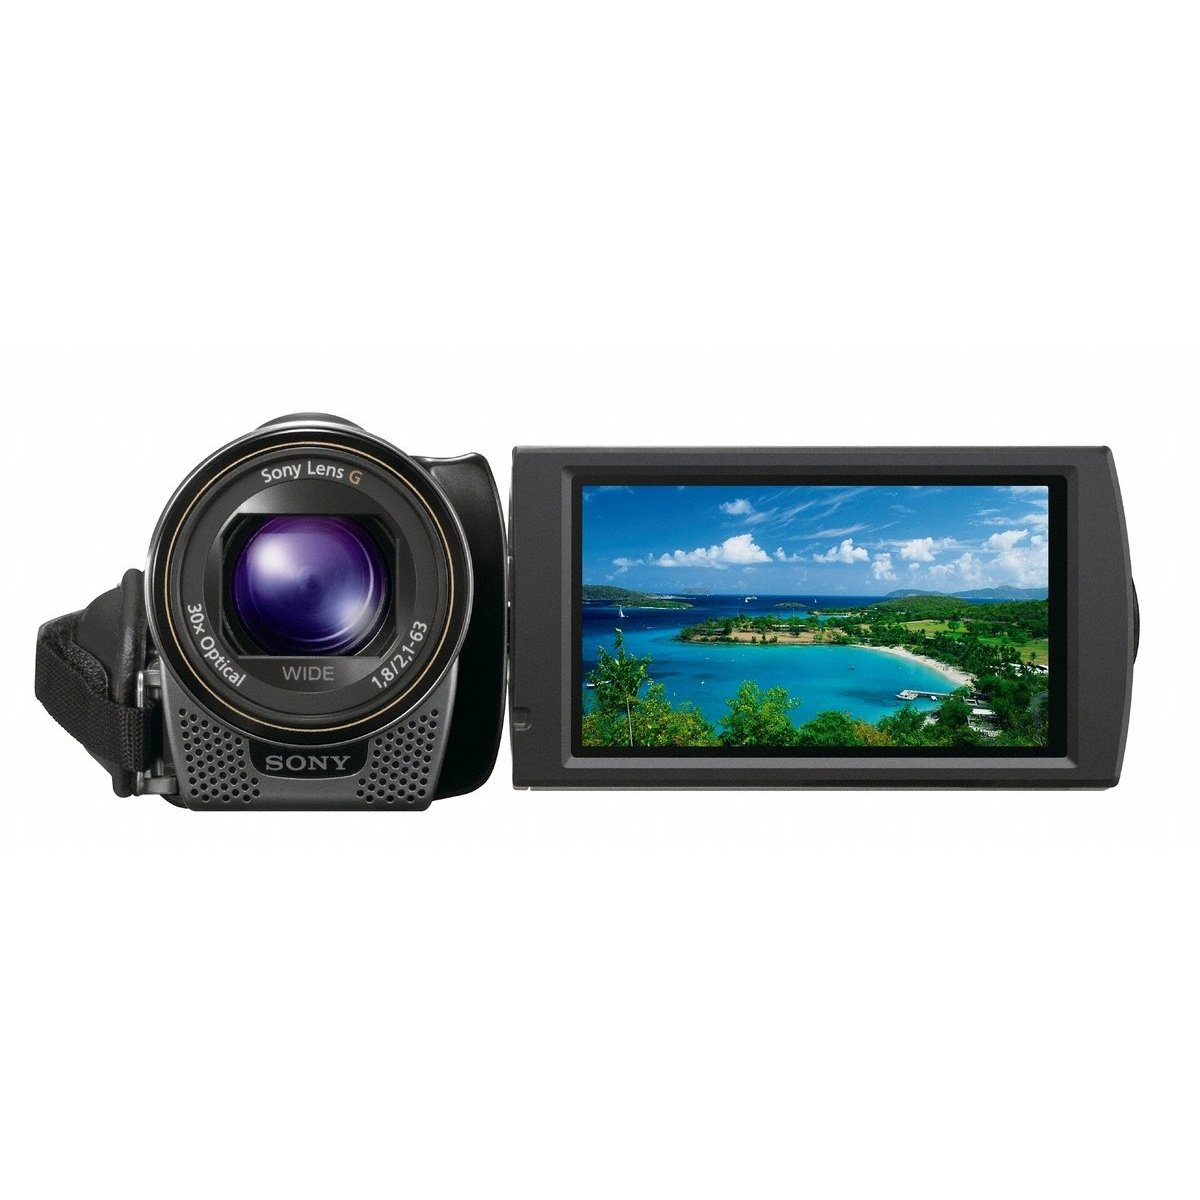 http://thetechjournal.com/wp-content/uploads/images/1110/1319908828-sony-hdrcx160-highdefinition-handycam-camcorder--4.jpg